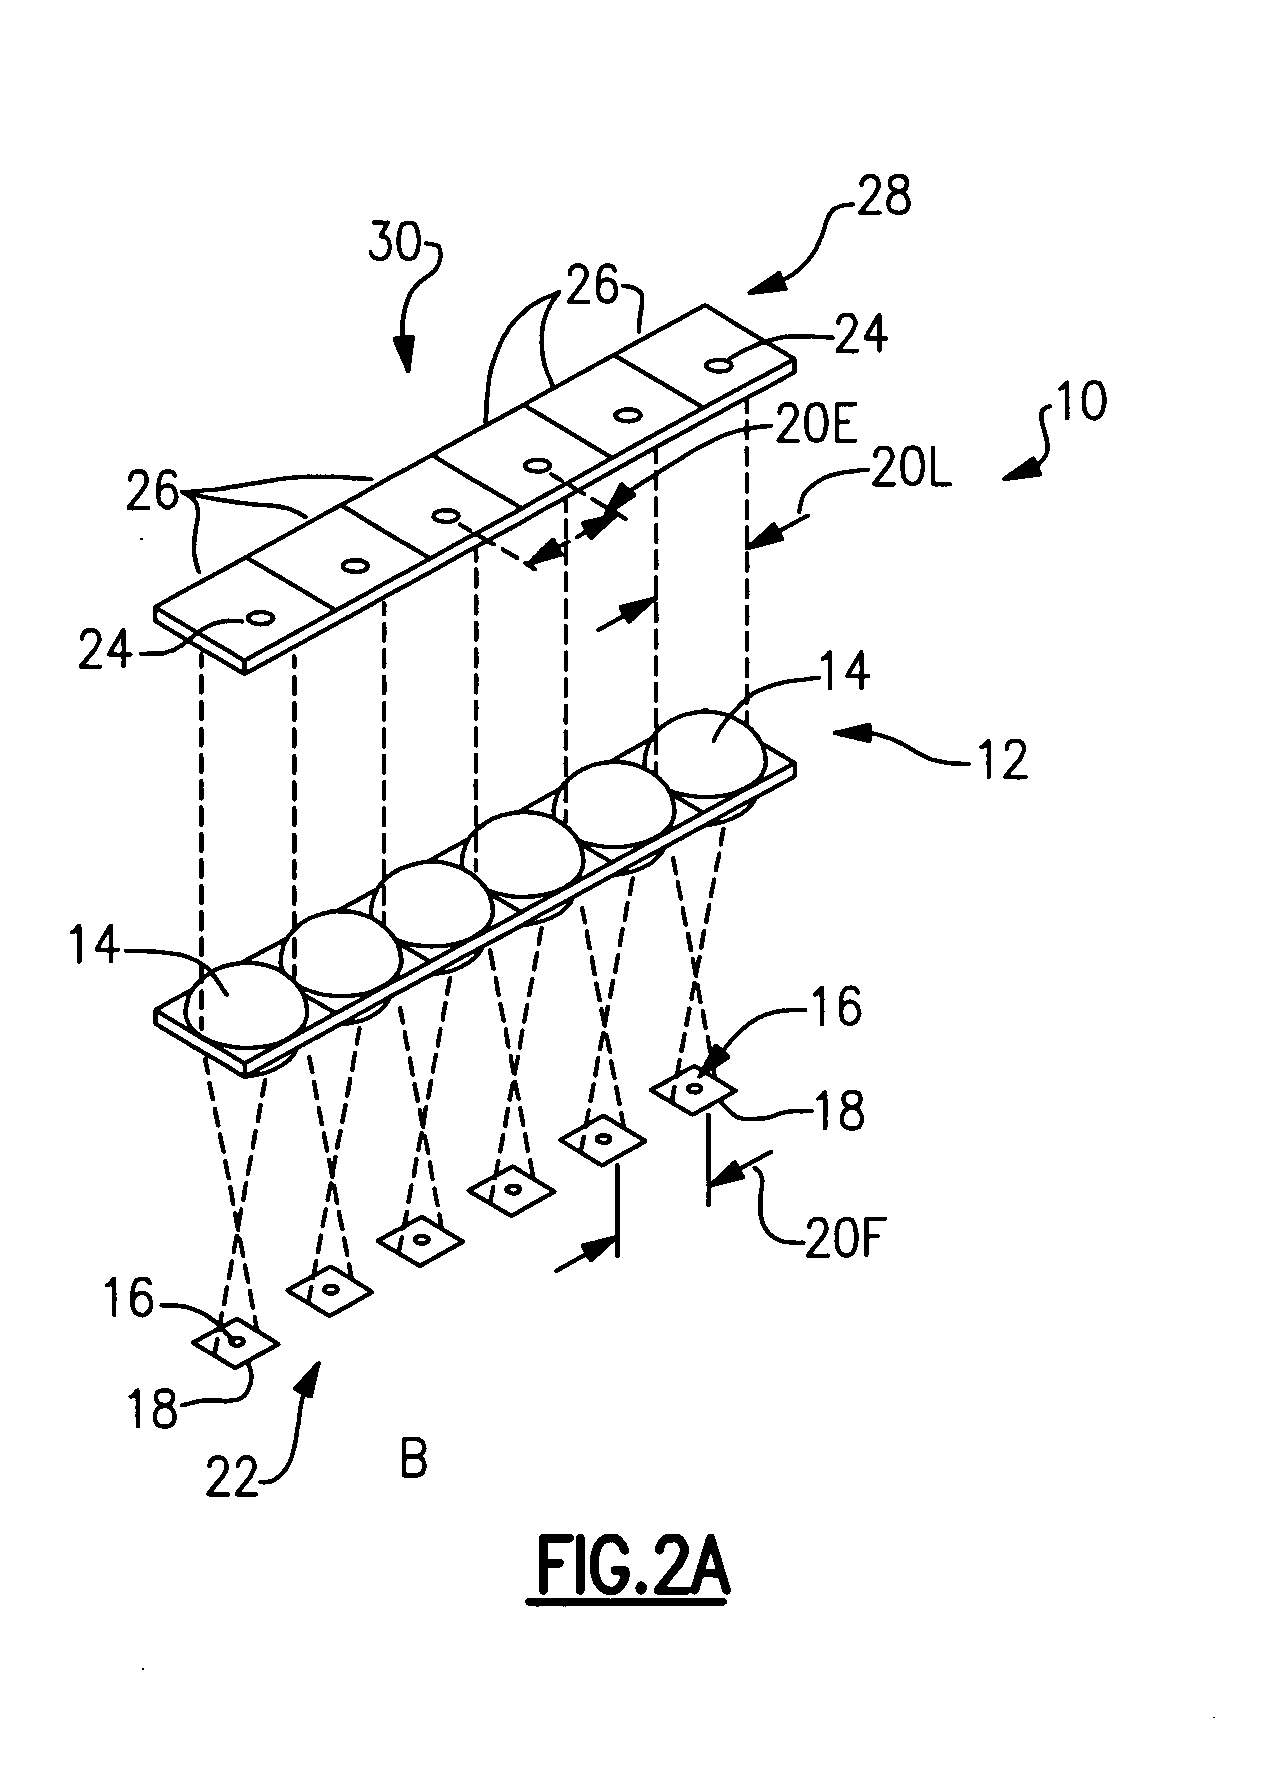 Apparatus and methods for the inspection of microvias in printed circuit boards